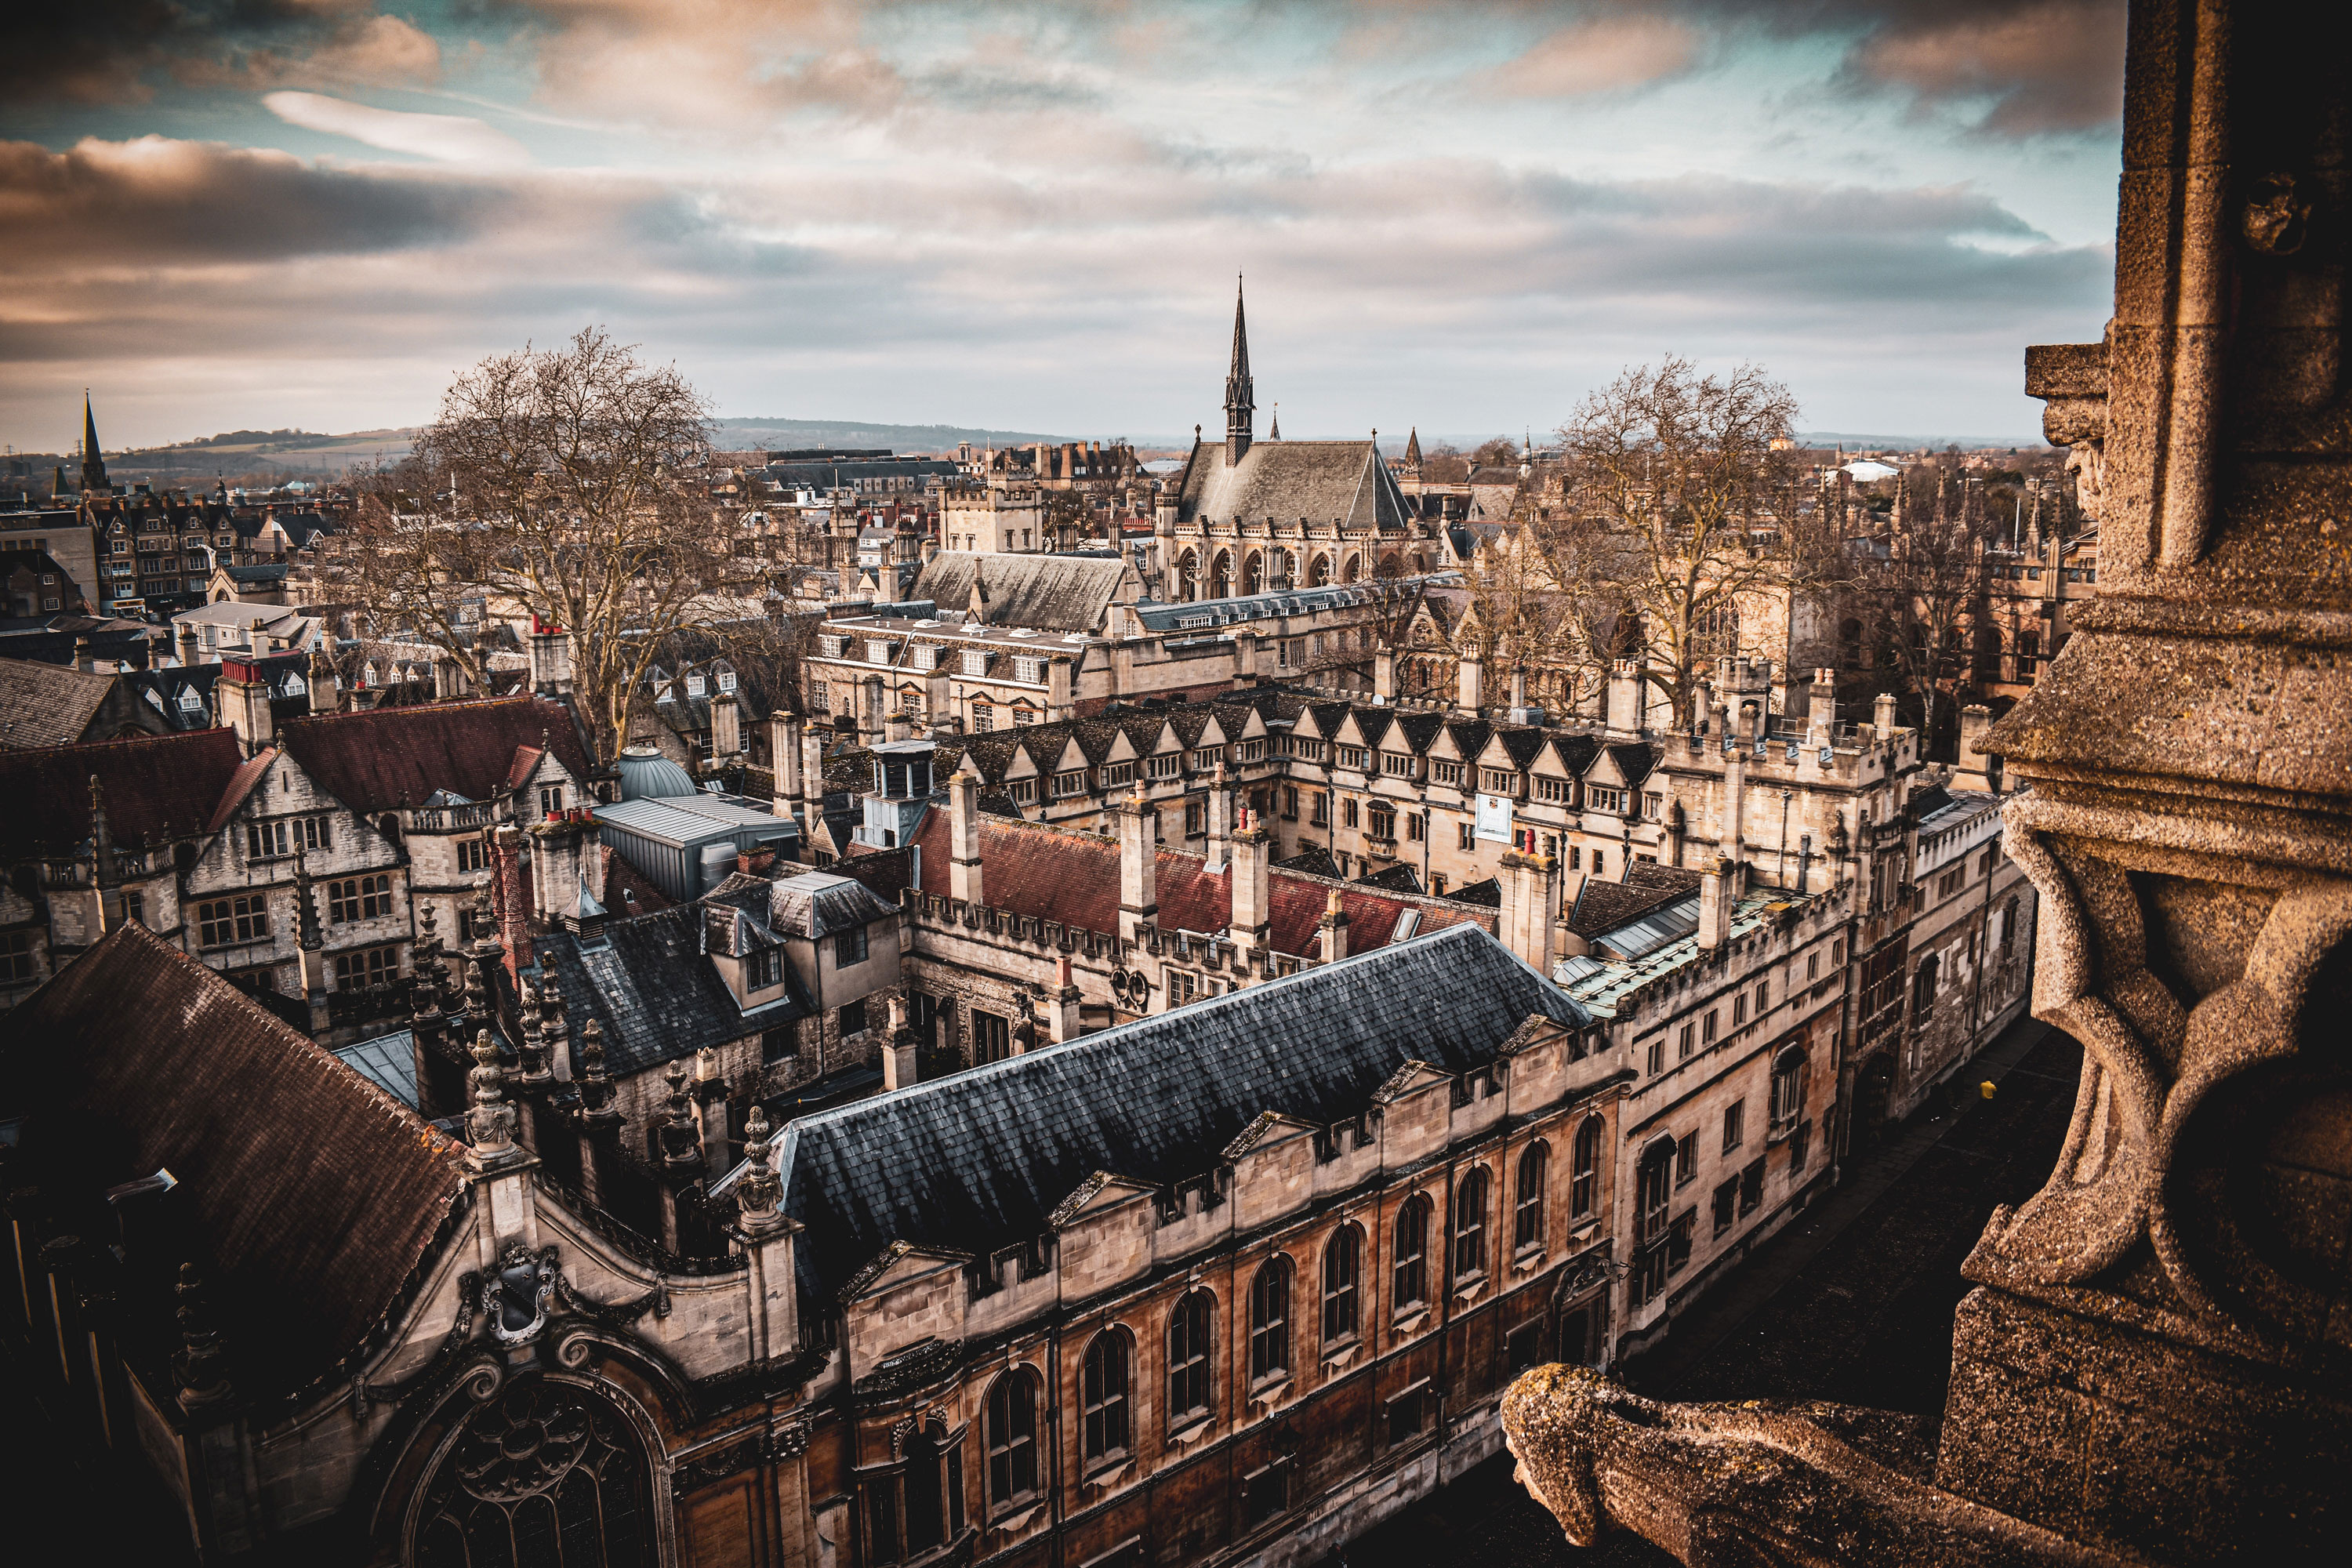 image of Oxford